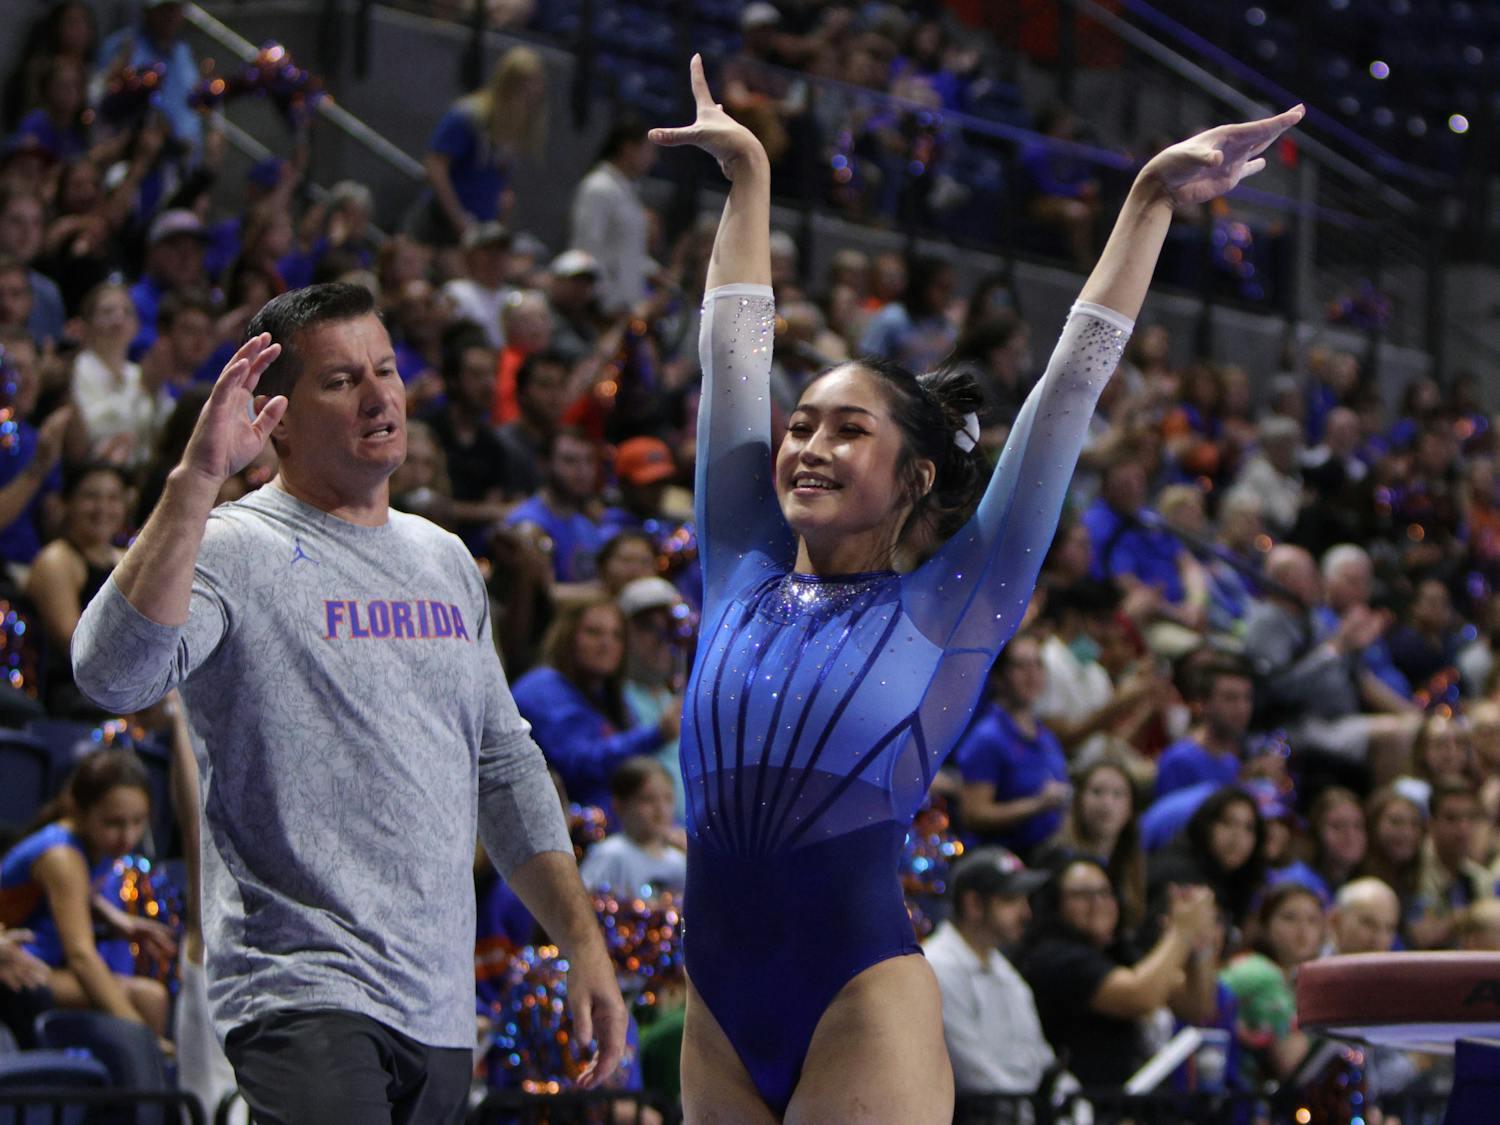 The Florida Gators gymnastics gave fans a preview of their upcoming 2024 season with their Hype Night Monday, Dec. 4. The team competed in all four apparatuses, showing off their routines on the floor, balance beam, uneven bars and vault. Gators seniors Victoria Nguyen and Chloi Clark kicked off their fourth year in college, while new faces like freshman Kaylee Bluffstone donned the orange and blue for the first time.&nbsp;